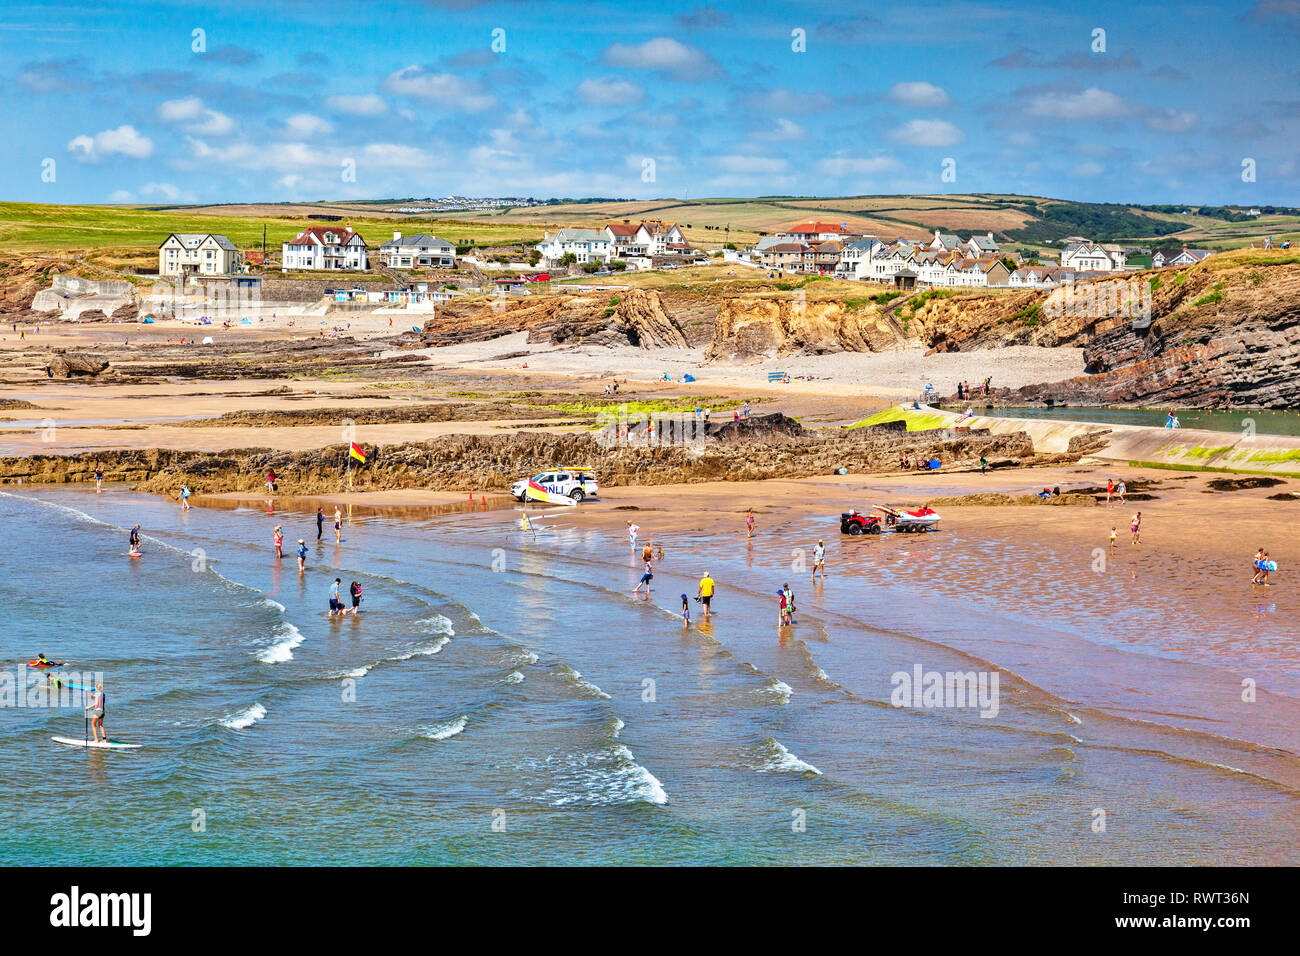 6 July 2018: Bude, Cornwall, UK - Crowds enjoying sun,sea and sand during the summer heatwave. Stock Photo